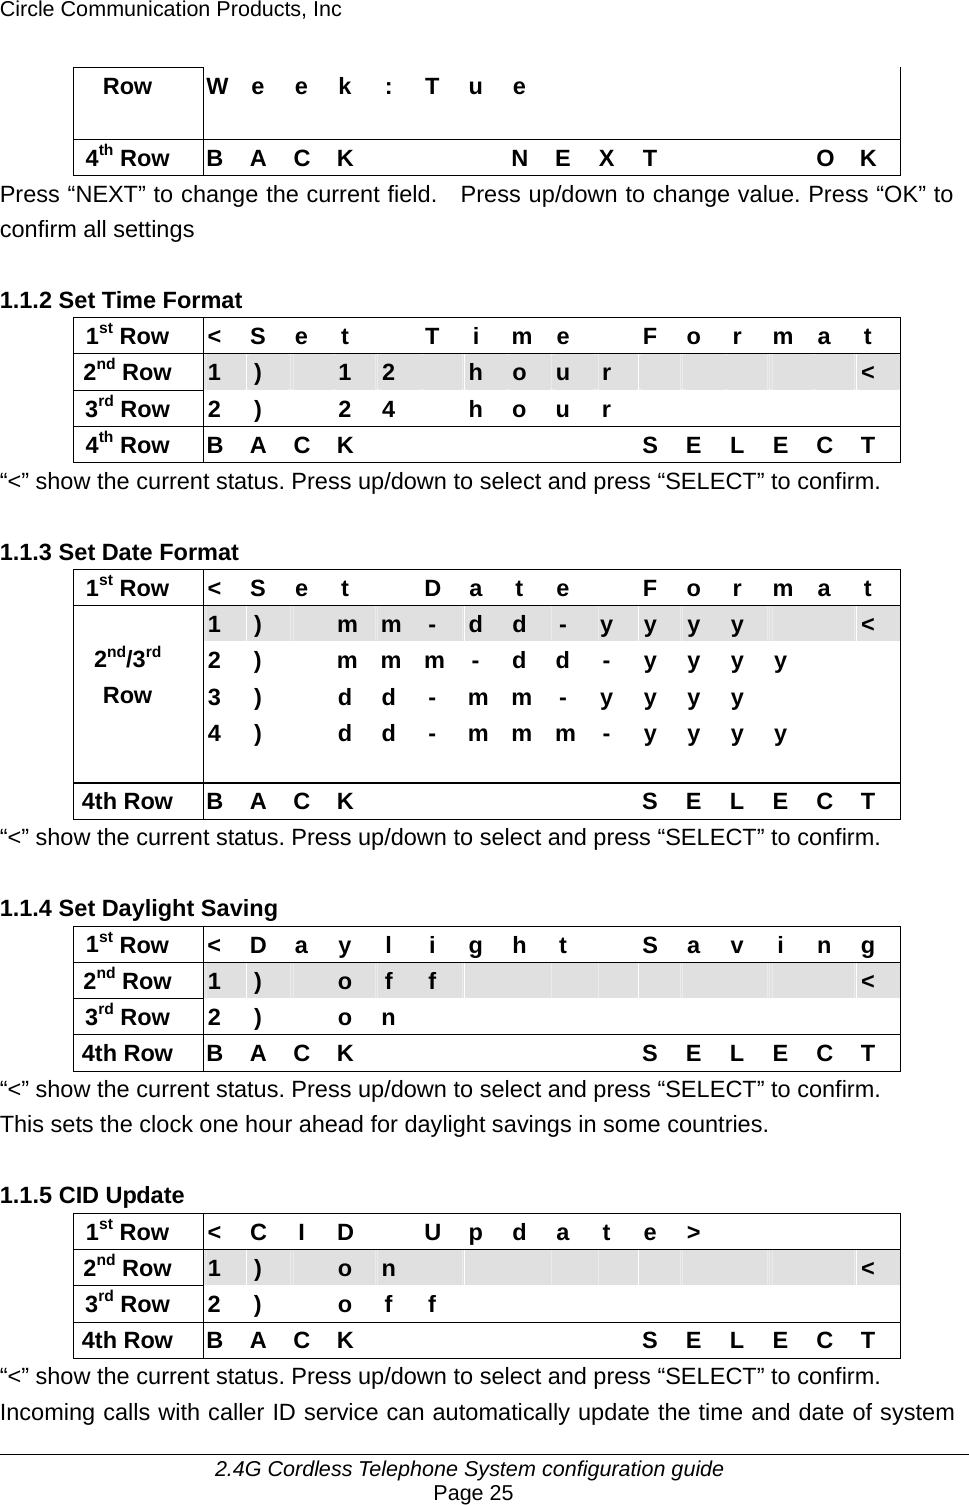 Circle Communication Products, Inc     2.4G Cordless Telephone System configuration guide Page 25 Row  W e e k : T u e         4th Row  B A C K        N E X T        O K Press “NEXT” to change the current field.    Press up/down to change value. Press “OK” to confirm all settings  1.1.2 Set Time Format 1st Row  &lt; S e t   T i m e   F o r m a t 2nd Row  1  )   1  2   h  o  u  r            &lt; 3rd Row 2 )  2 4  h o u r       4th Row B A C K       S E L E C T “&lt;” show the current status. Press up/down to select and press “SELECT” to confirm.  1.1.3 Set Date Format 1st Row  &lt; S e t   D a t e   F o r m a t 1  )   m  m  -  d  d  -  y  y  y  y      &lt; 2 )   m m m - d d - y y y y     3 )   d d - m m - y y y y        2nd/3rd Row   4 )   d d - m m m - y y y y     4th Row B A C K       S E L E C T “&lt;” show the current status. Press up/down to select and press “SELECT” to confirm.  1.1.4 Set Daylight Saving 1st Row  &lt;  D  a  y  l  i  g  h  t    S  a  v  i  n  g 2nd Row  1  )   o  f  f                    &lt; 3rd Row 2 )  o n            4th Row B A C K       S E L E C T “&lt;” show the current status. Press up/down to select and press “SELECT” to confirm. This sets the clock one hour ahead for daylight savings in some countries.  1.1.5 CID Update 1st Row &lt; C I D  U p d a t e &gt;     2nd Row  1  )   o  n                      &lt; 3rd Row 2 )  o f f           4th Row B A C K       S E L E C T “&lt;” show the current status. Press up/down to select and press “SELECT” to confirm. Incoming calls with caller ID service can automatically update the time and date of system 